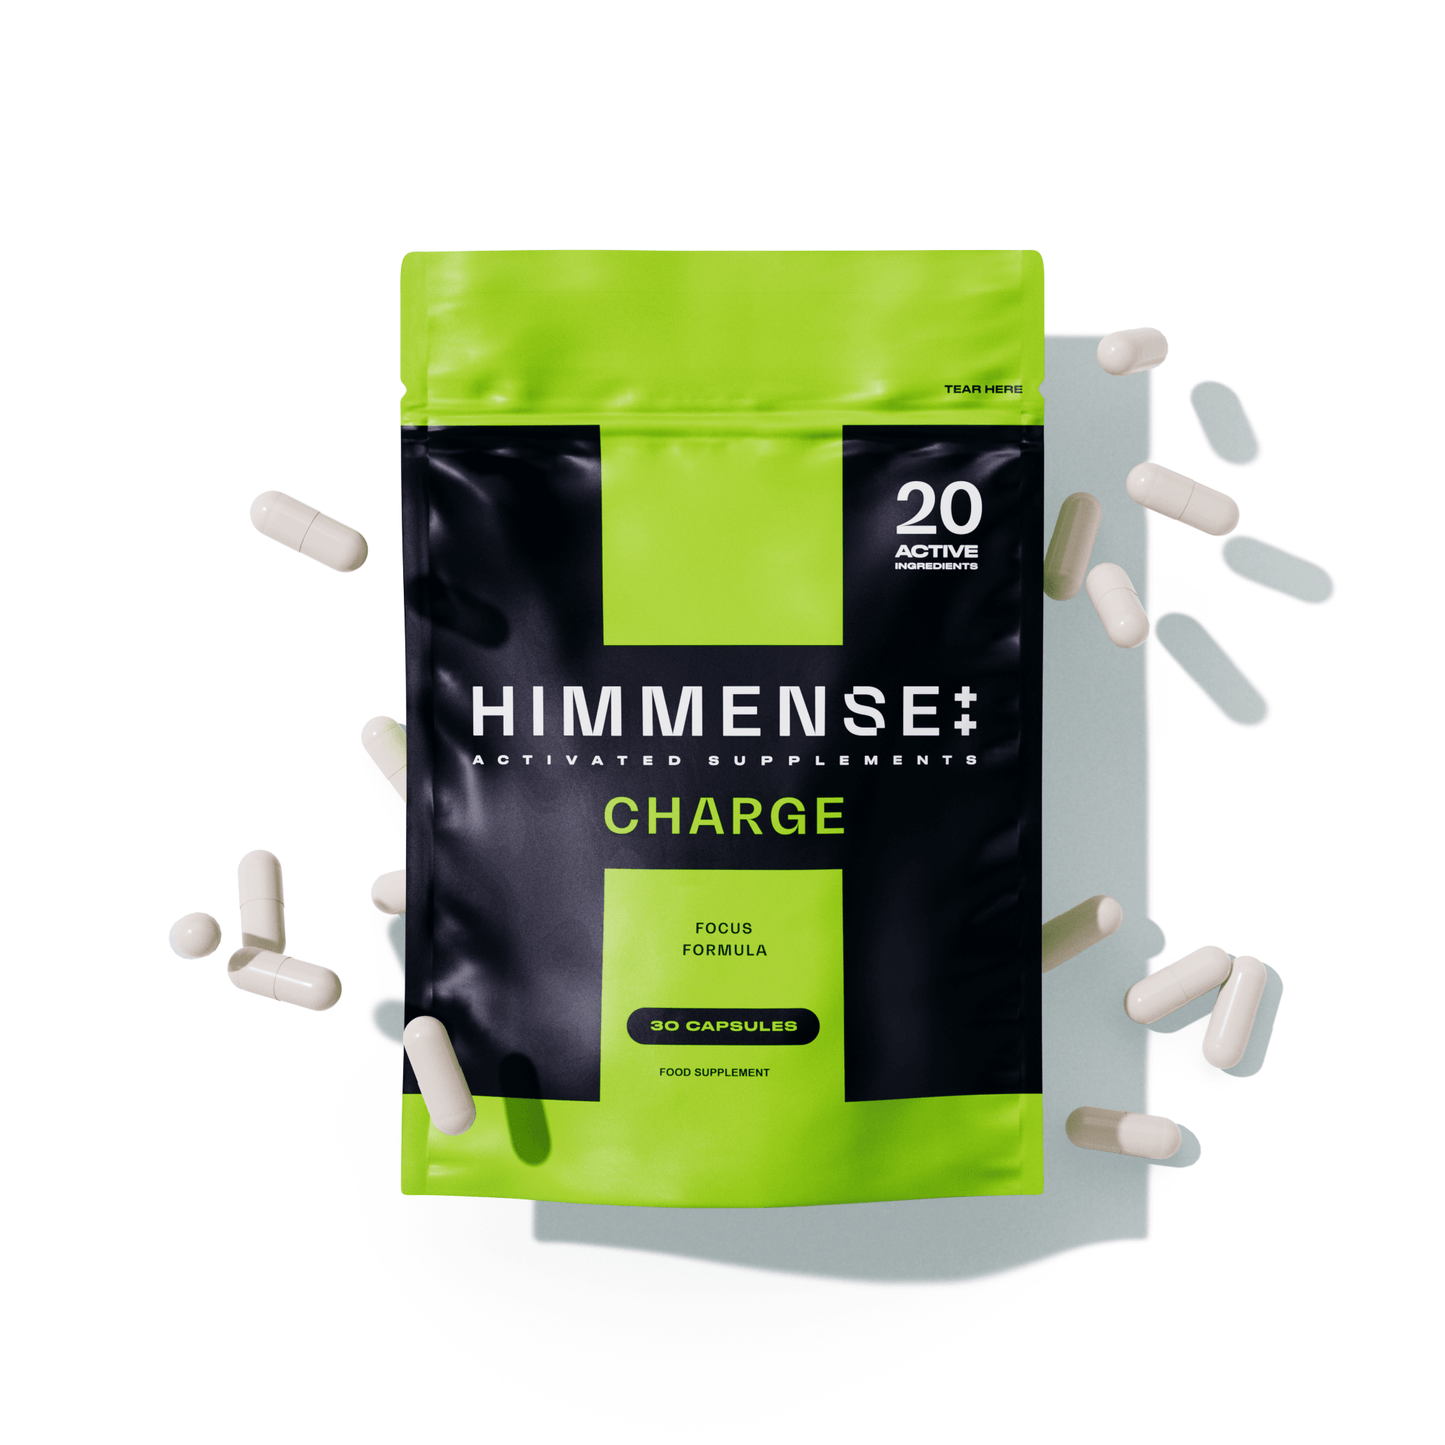 Himmense CHARGE supplement package with scattered capsules for enhanced cognitive function, alertness, concentration, energy, and stamina.